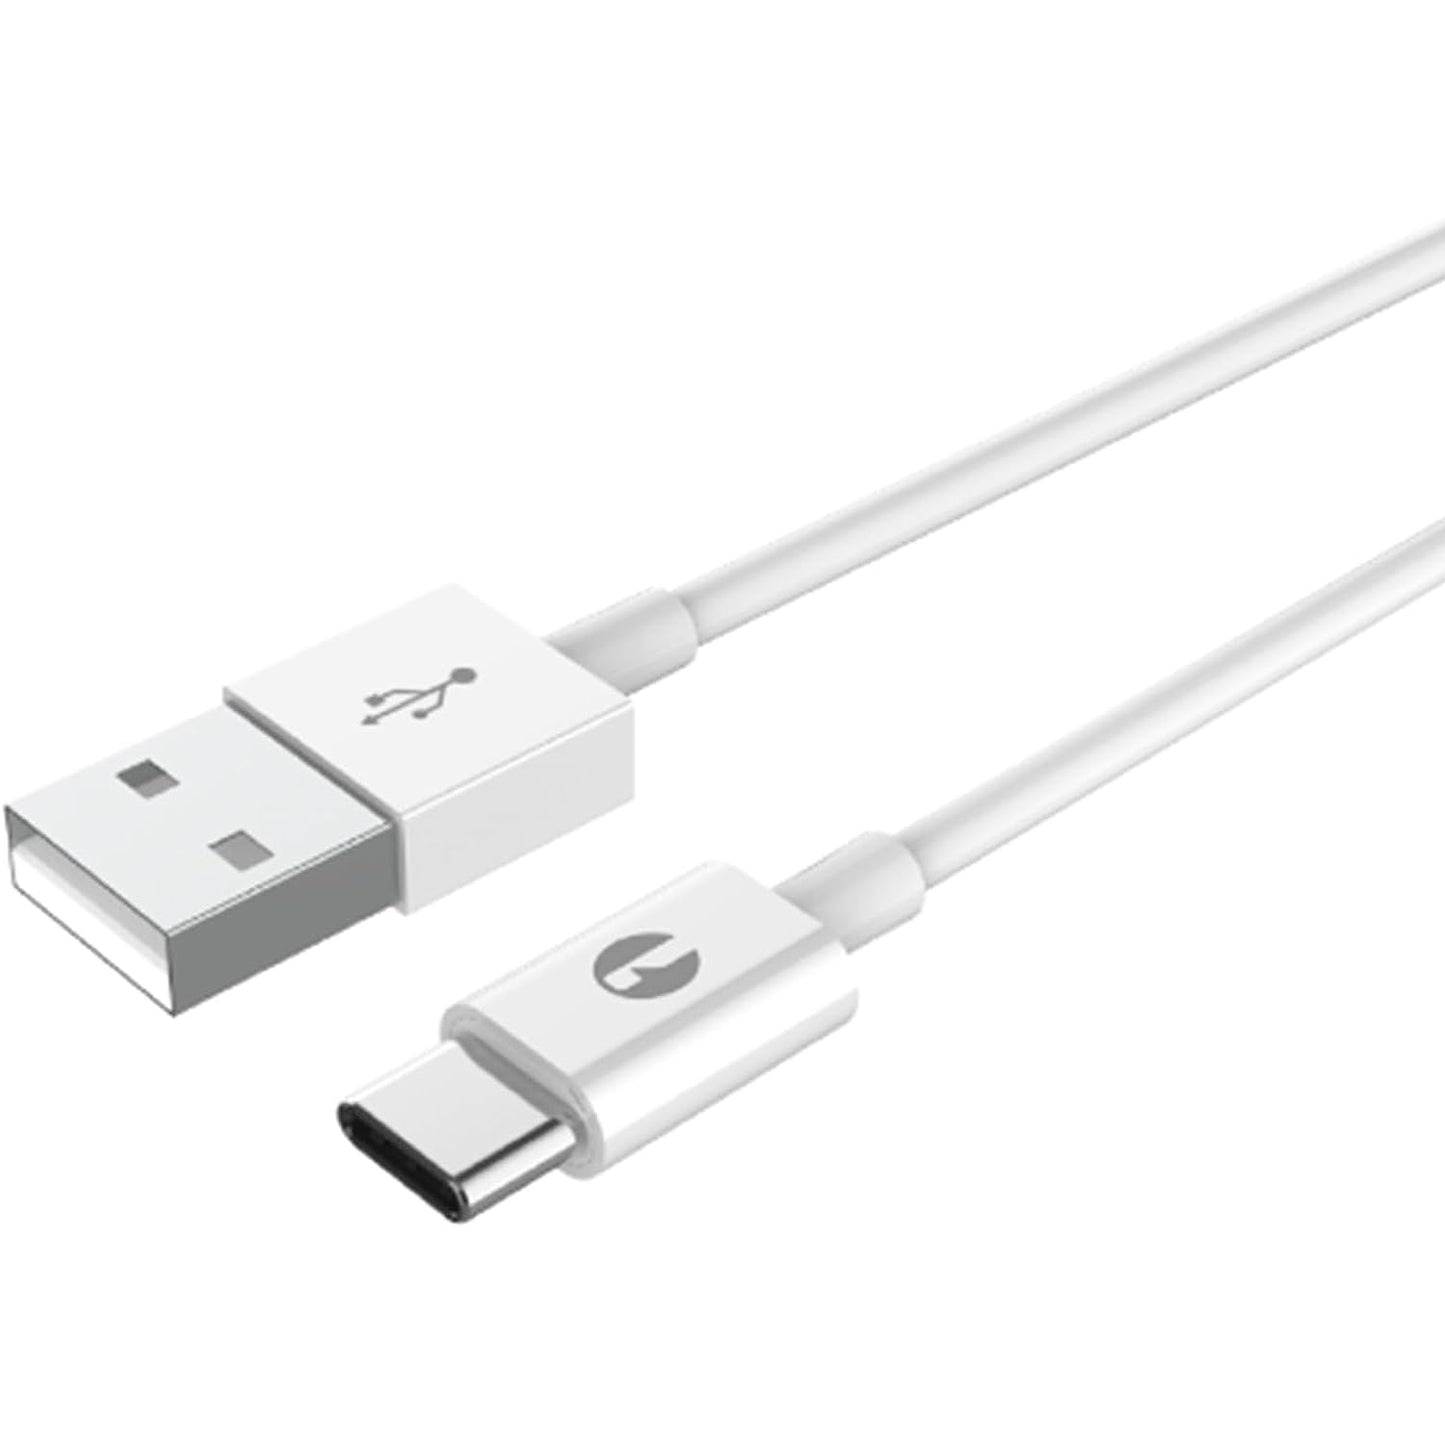 Isnatch USB C Cable, Charger Cable for Smartphones and Tablets, Charging Cable